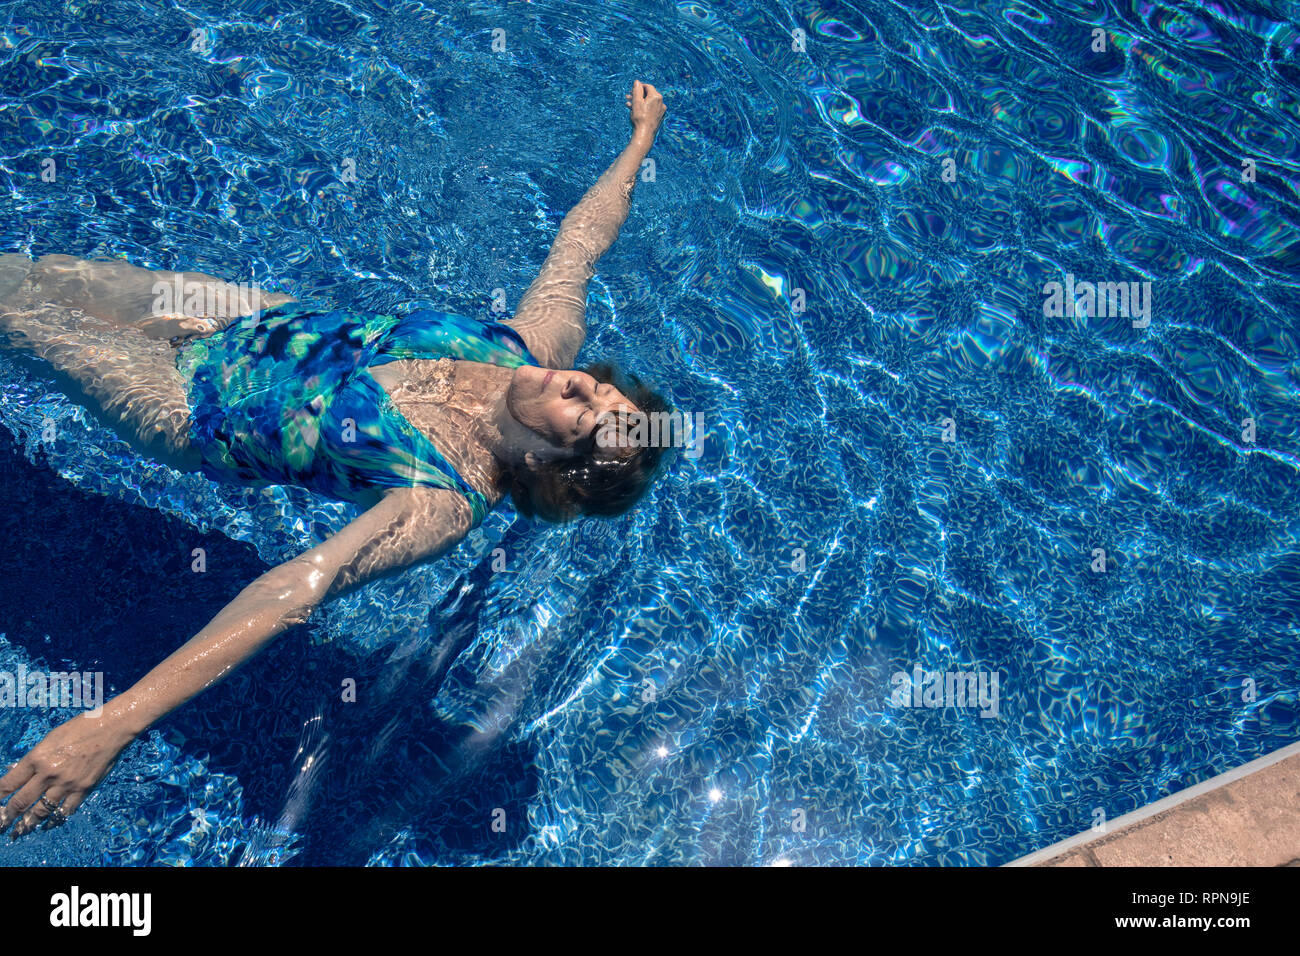 Senior woman floating in the swimming pool. Stock Photo